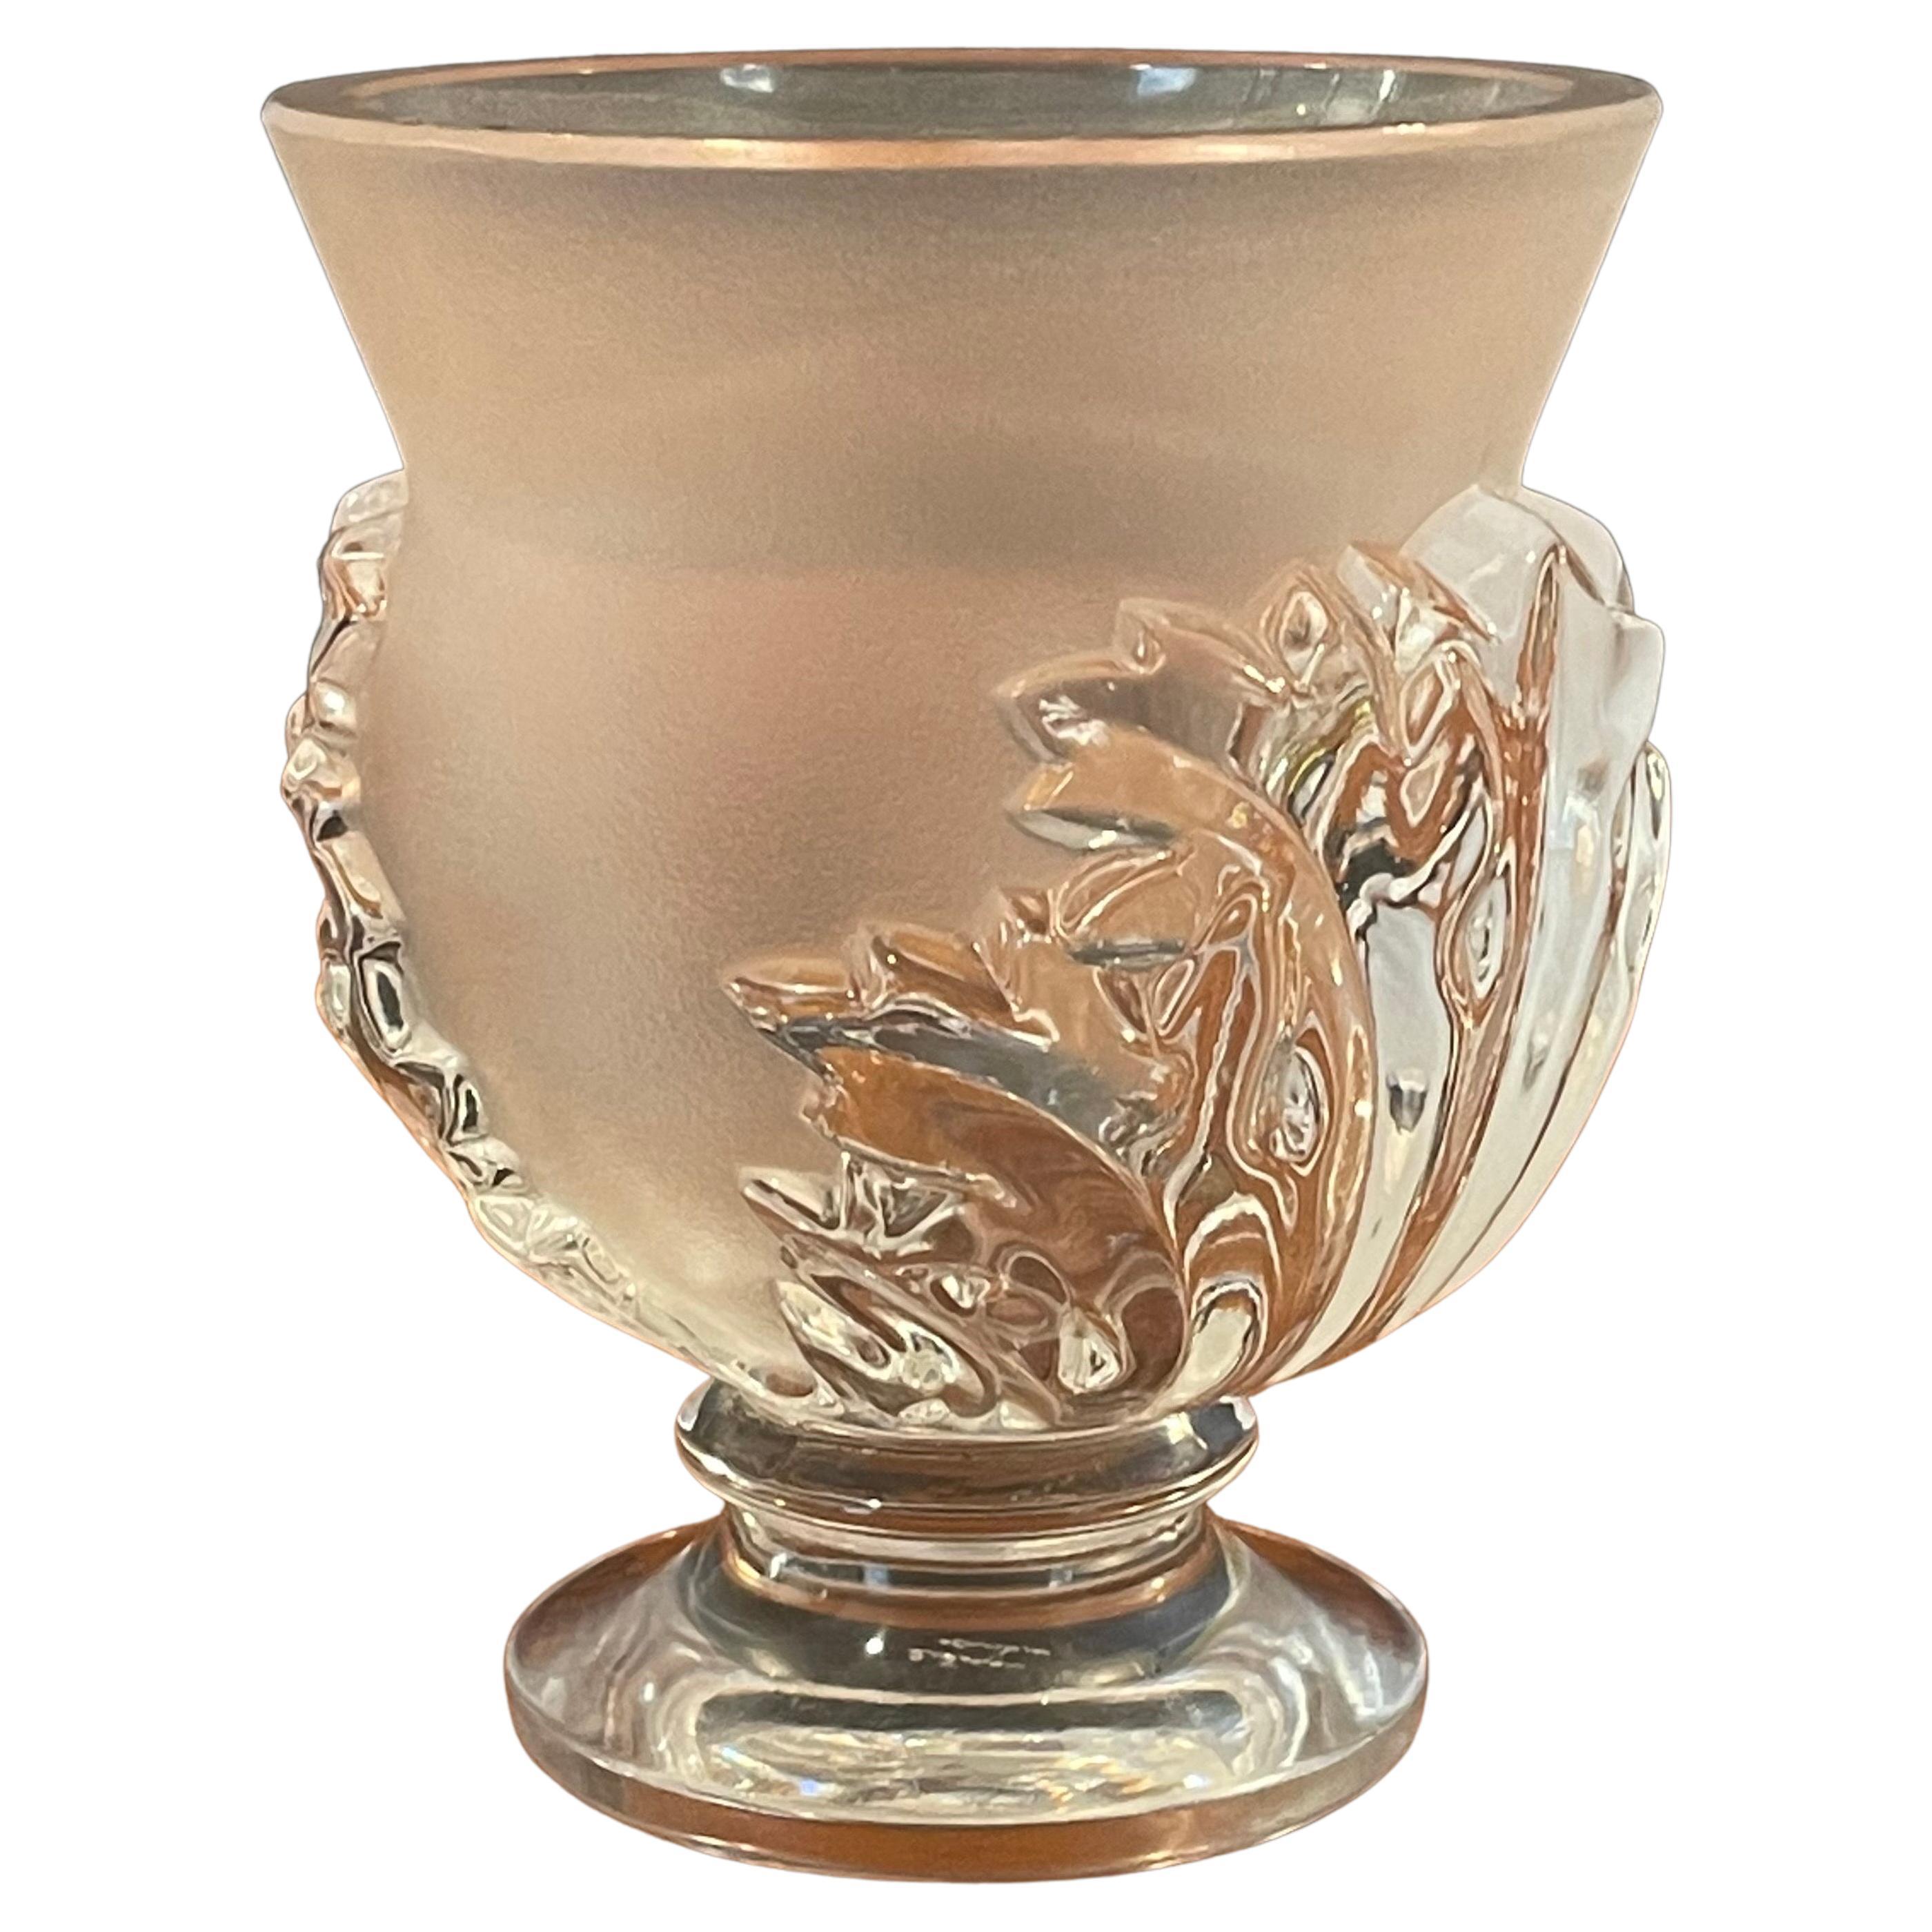 Satin Crystal St. Cloud Vase with Acanthus Leaves by Lalique of France